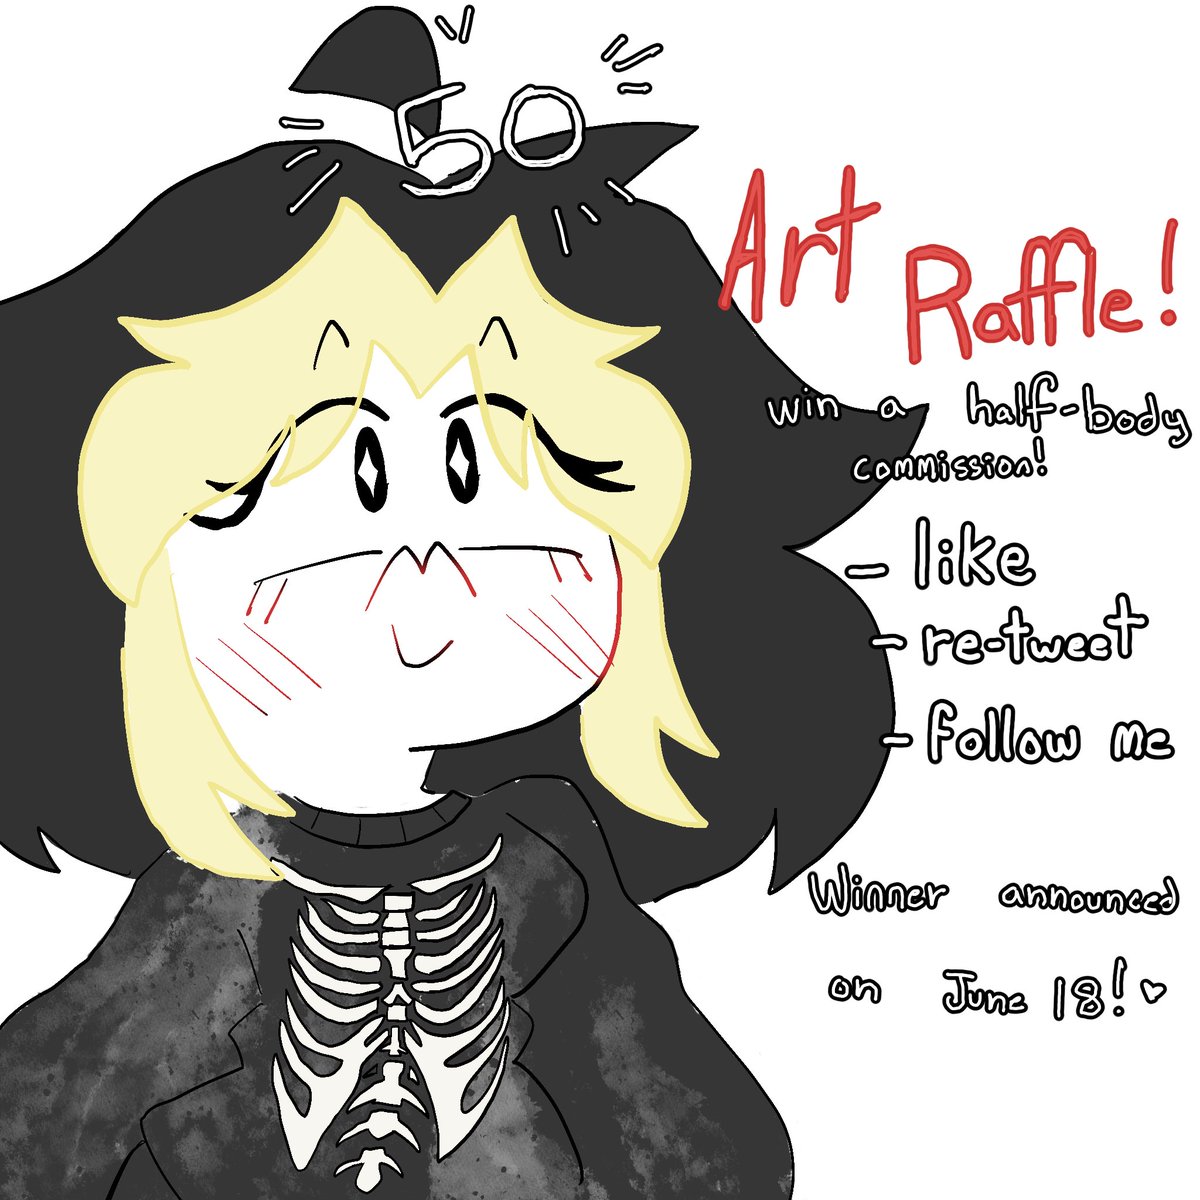 OH MY GOD THANK YOU FOR 50 FOLLOWERS!!! As a celebration im doing an #art_raffle! 
 💫 Make sure to to the followings to be able to participate:)))

- Follow me
- Like this tweet
- and Re-Tweet!

🔴 Ends on June 18! 
.
.
.
#artraffle #commisionsopen #artgiveaway #raffle